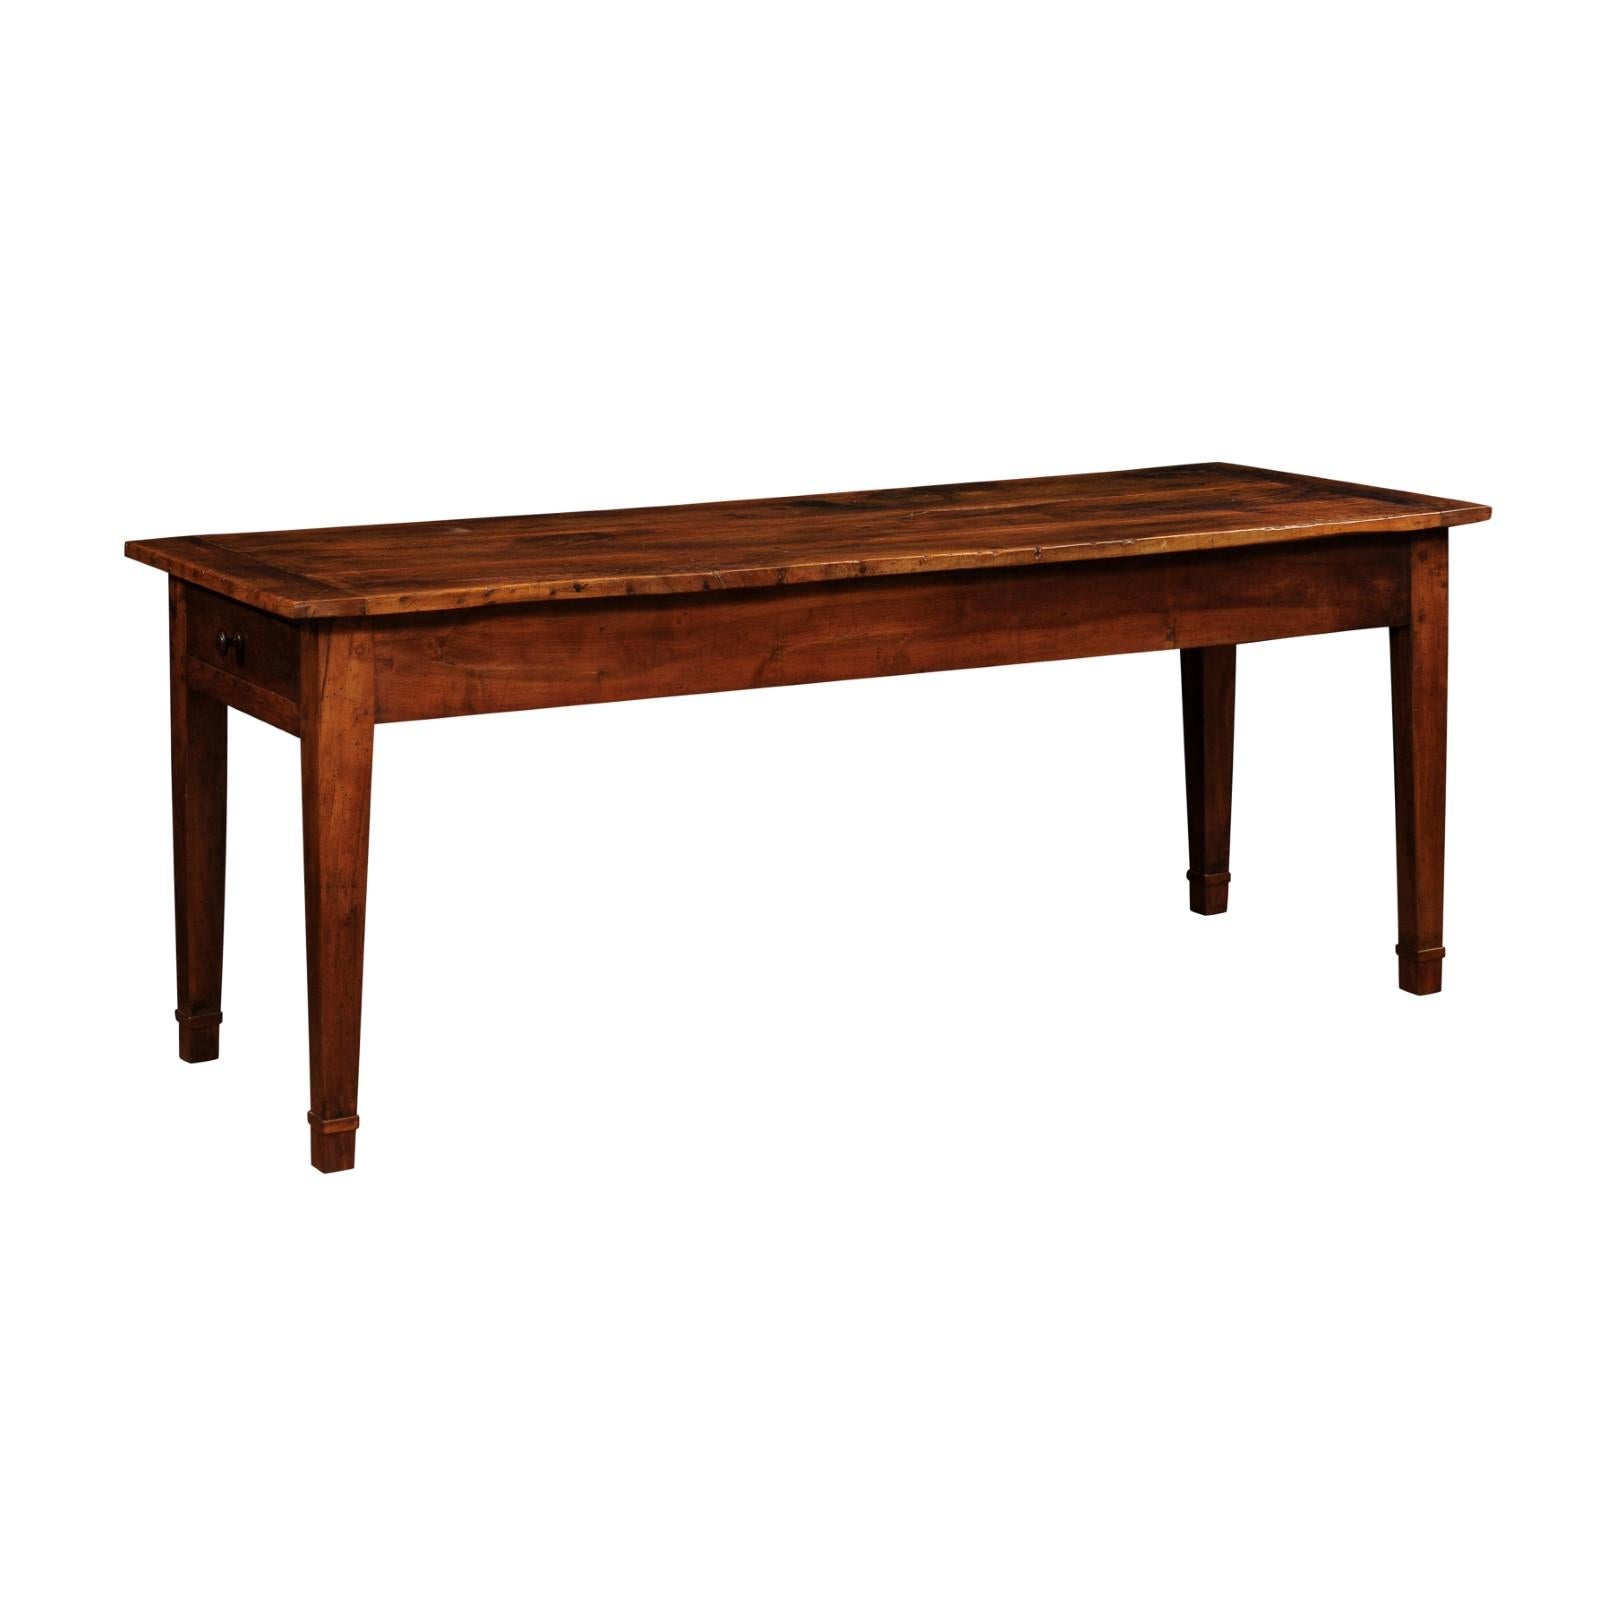 A French Louis XVI style walnut and elm table from the 19th century, with single lateral drawer, tapered legs and great rustic character. Created in France during the 19th century, this walnut and elm table charms us with its rustic presence and